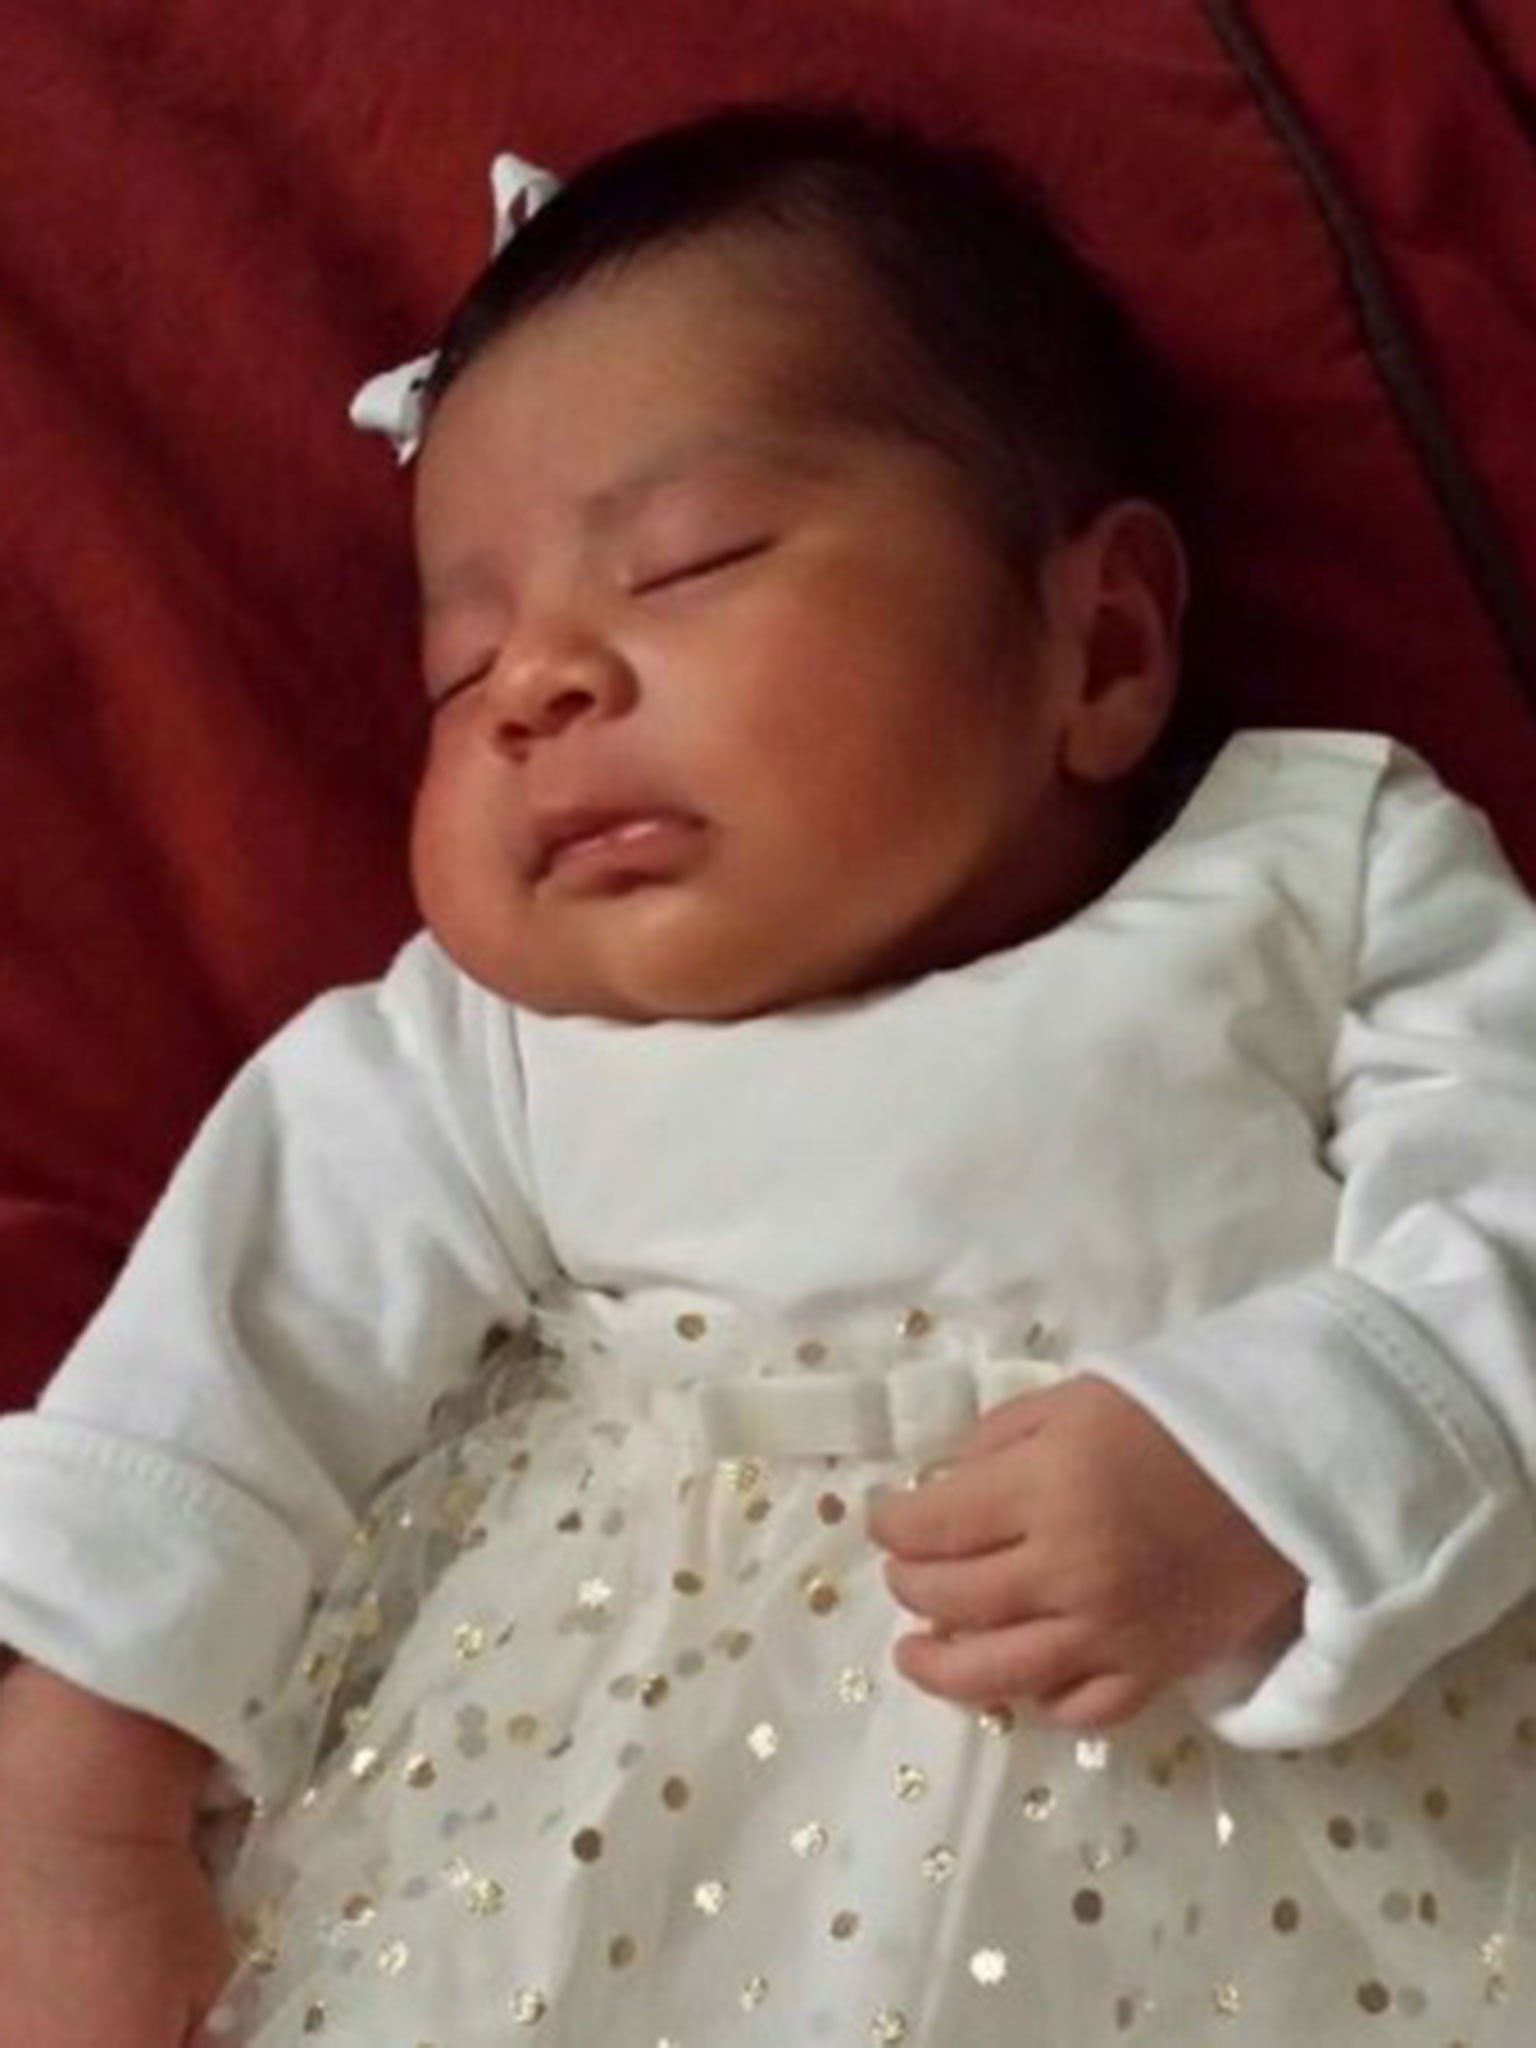 Three-week-old Eliza Delacrus, who weighs a mere 10lb, has been reported missing